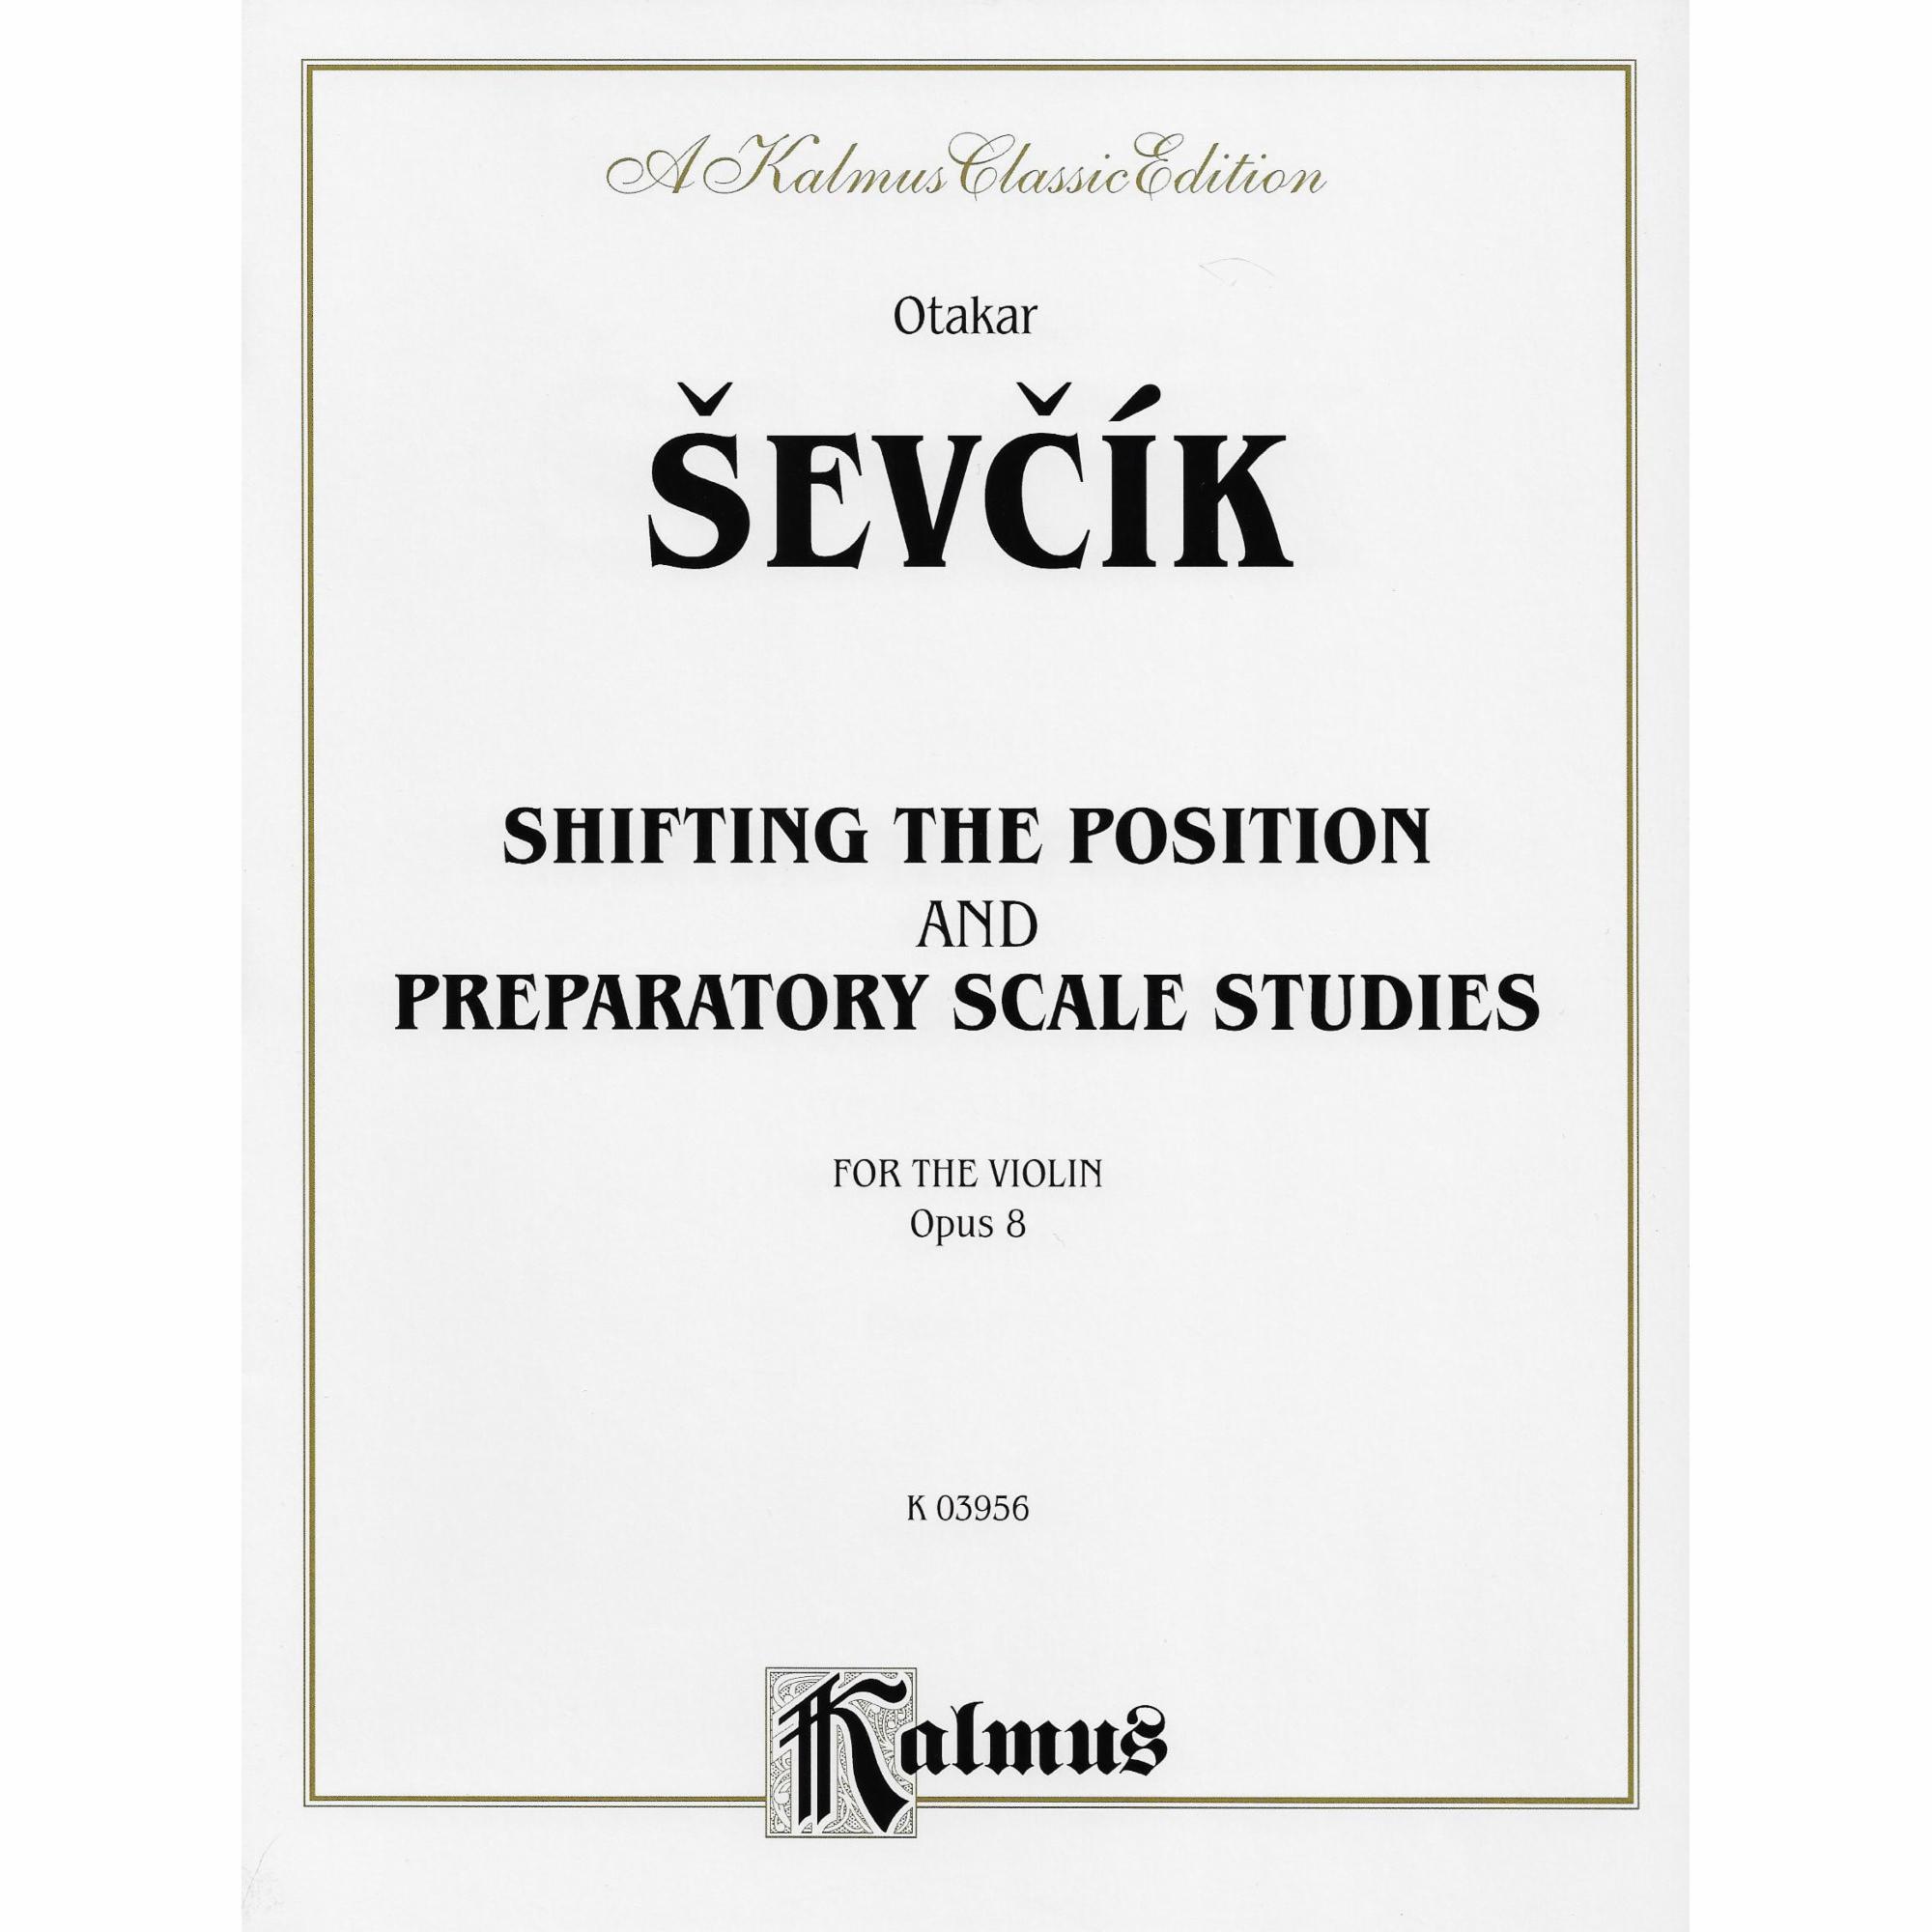 Sevcik -- Shifting the Position and Preparatory Scale Studies, Op. 8 for Violin